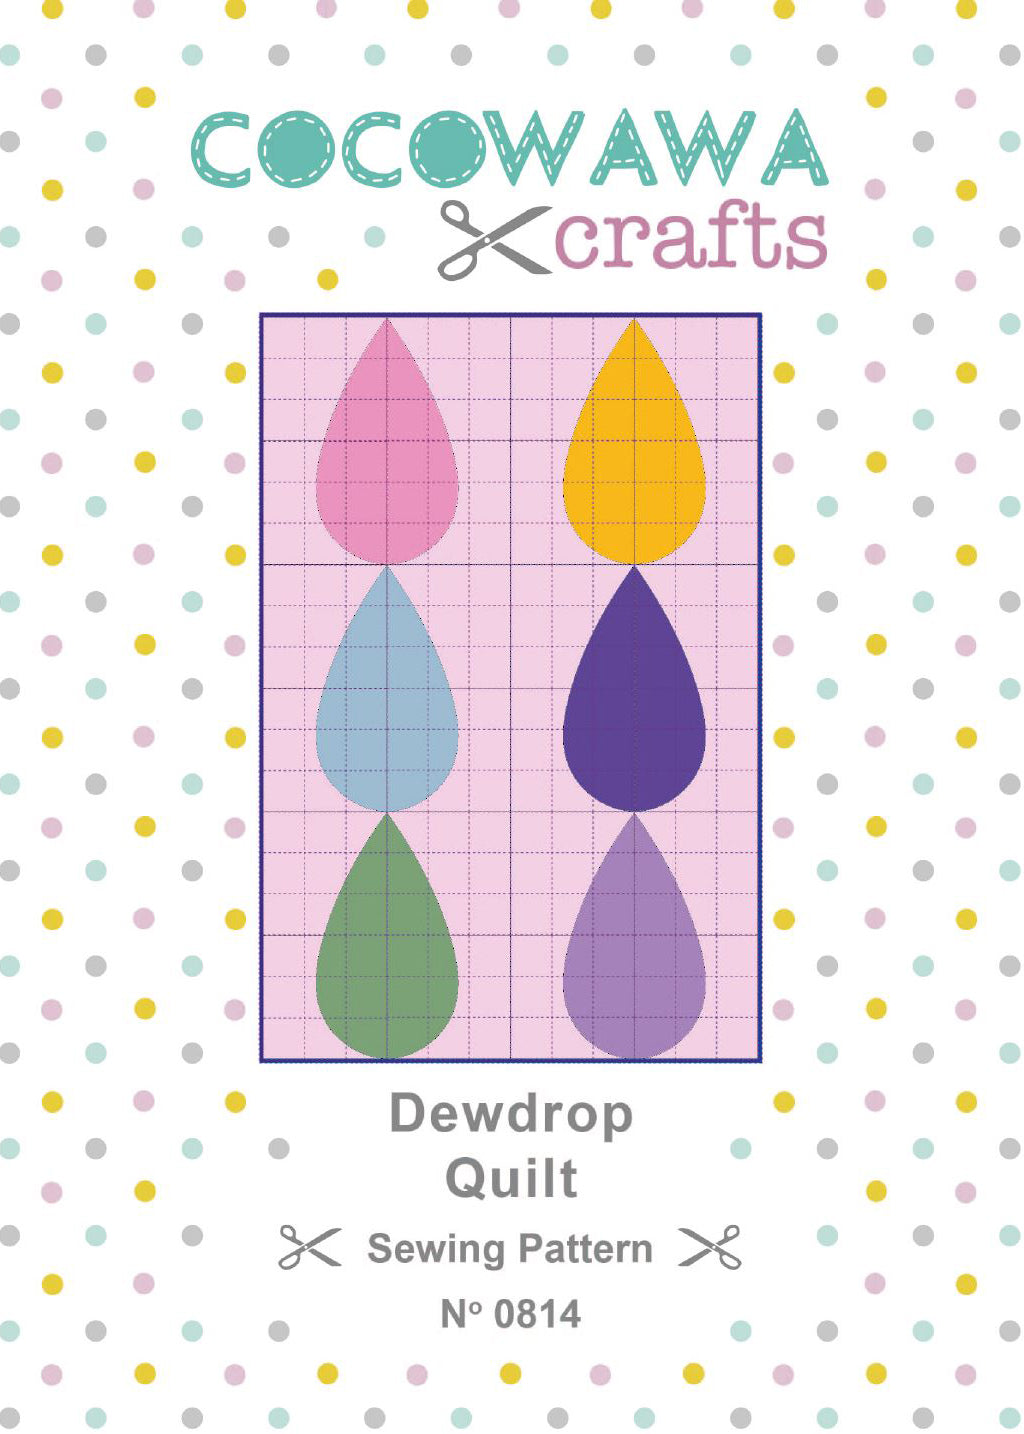 Cover CocoWawa DewDrop quilt sewing pattern